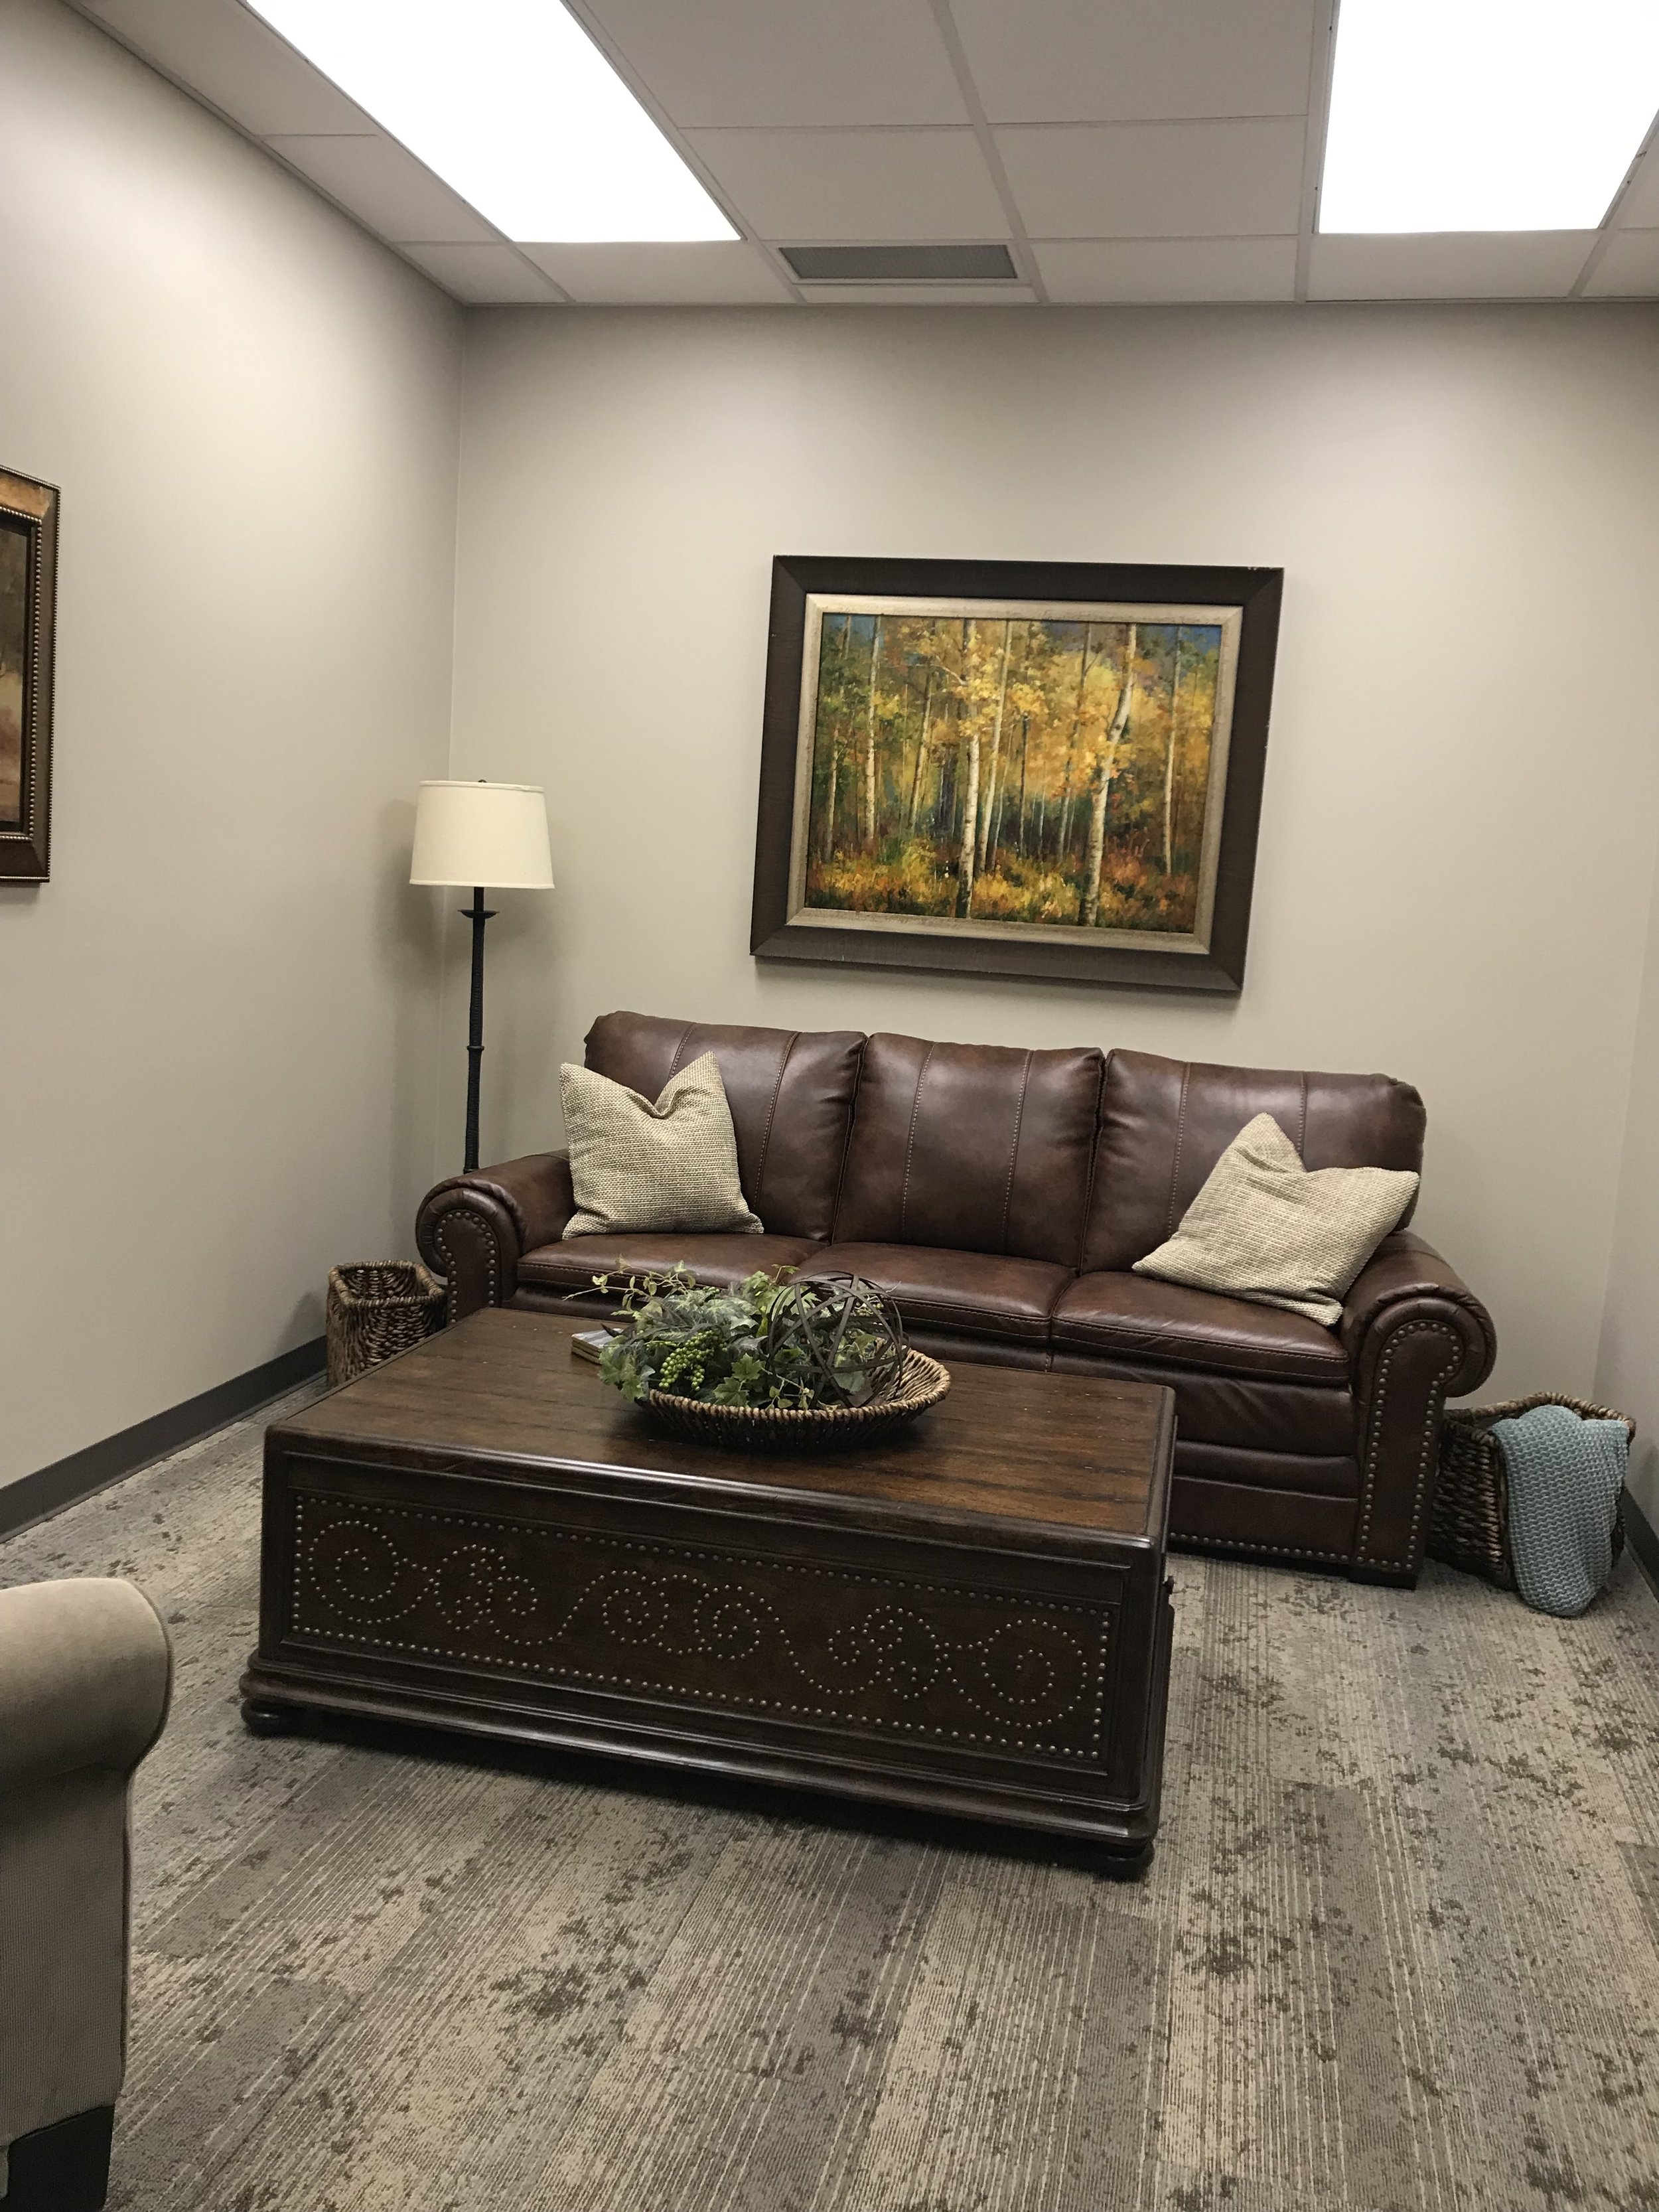  Addition - Counseling Room 